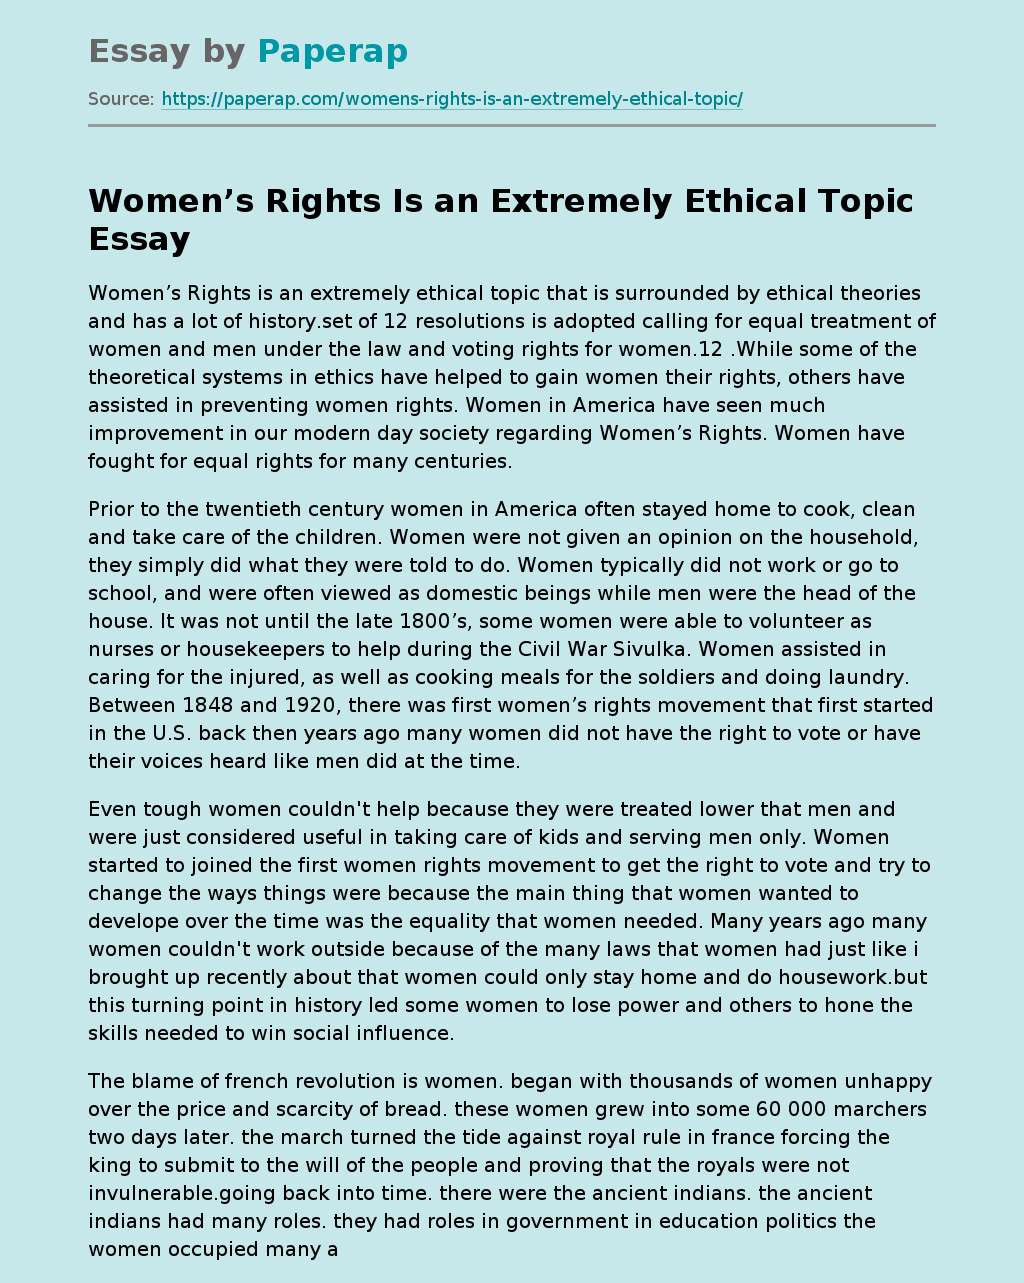 Women’s Rights Is an Extremely Ethical Topic